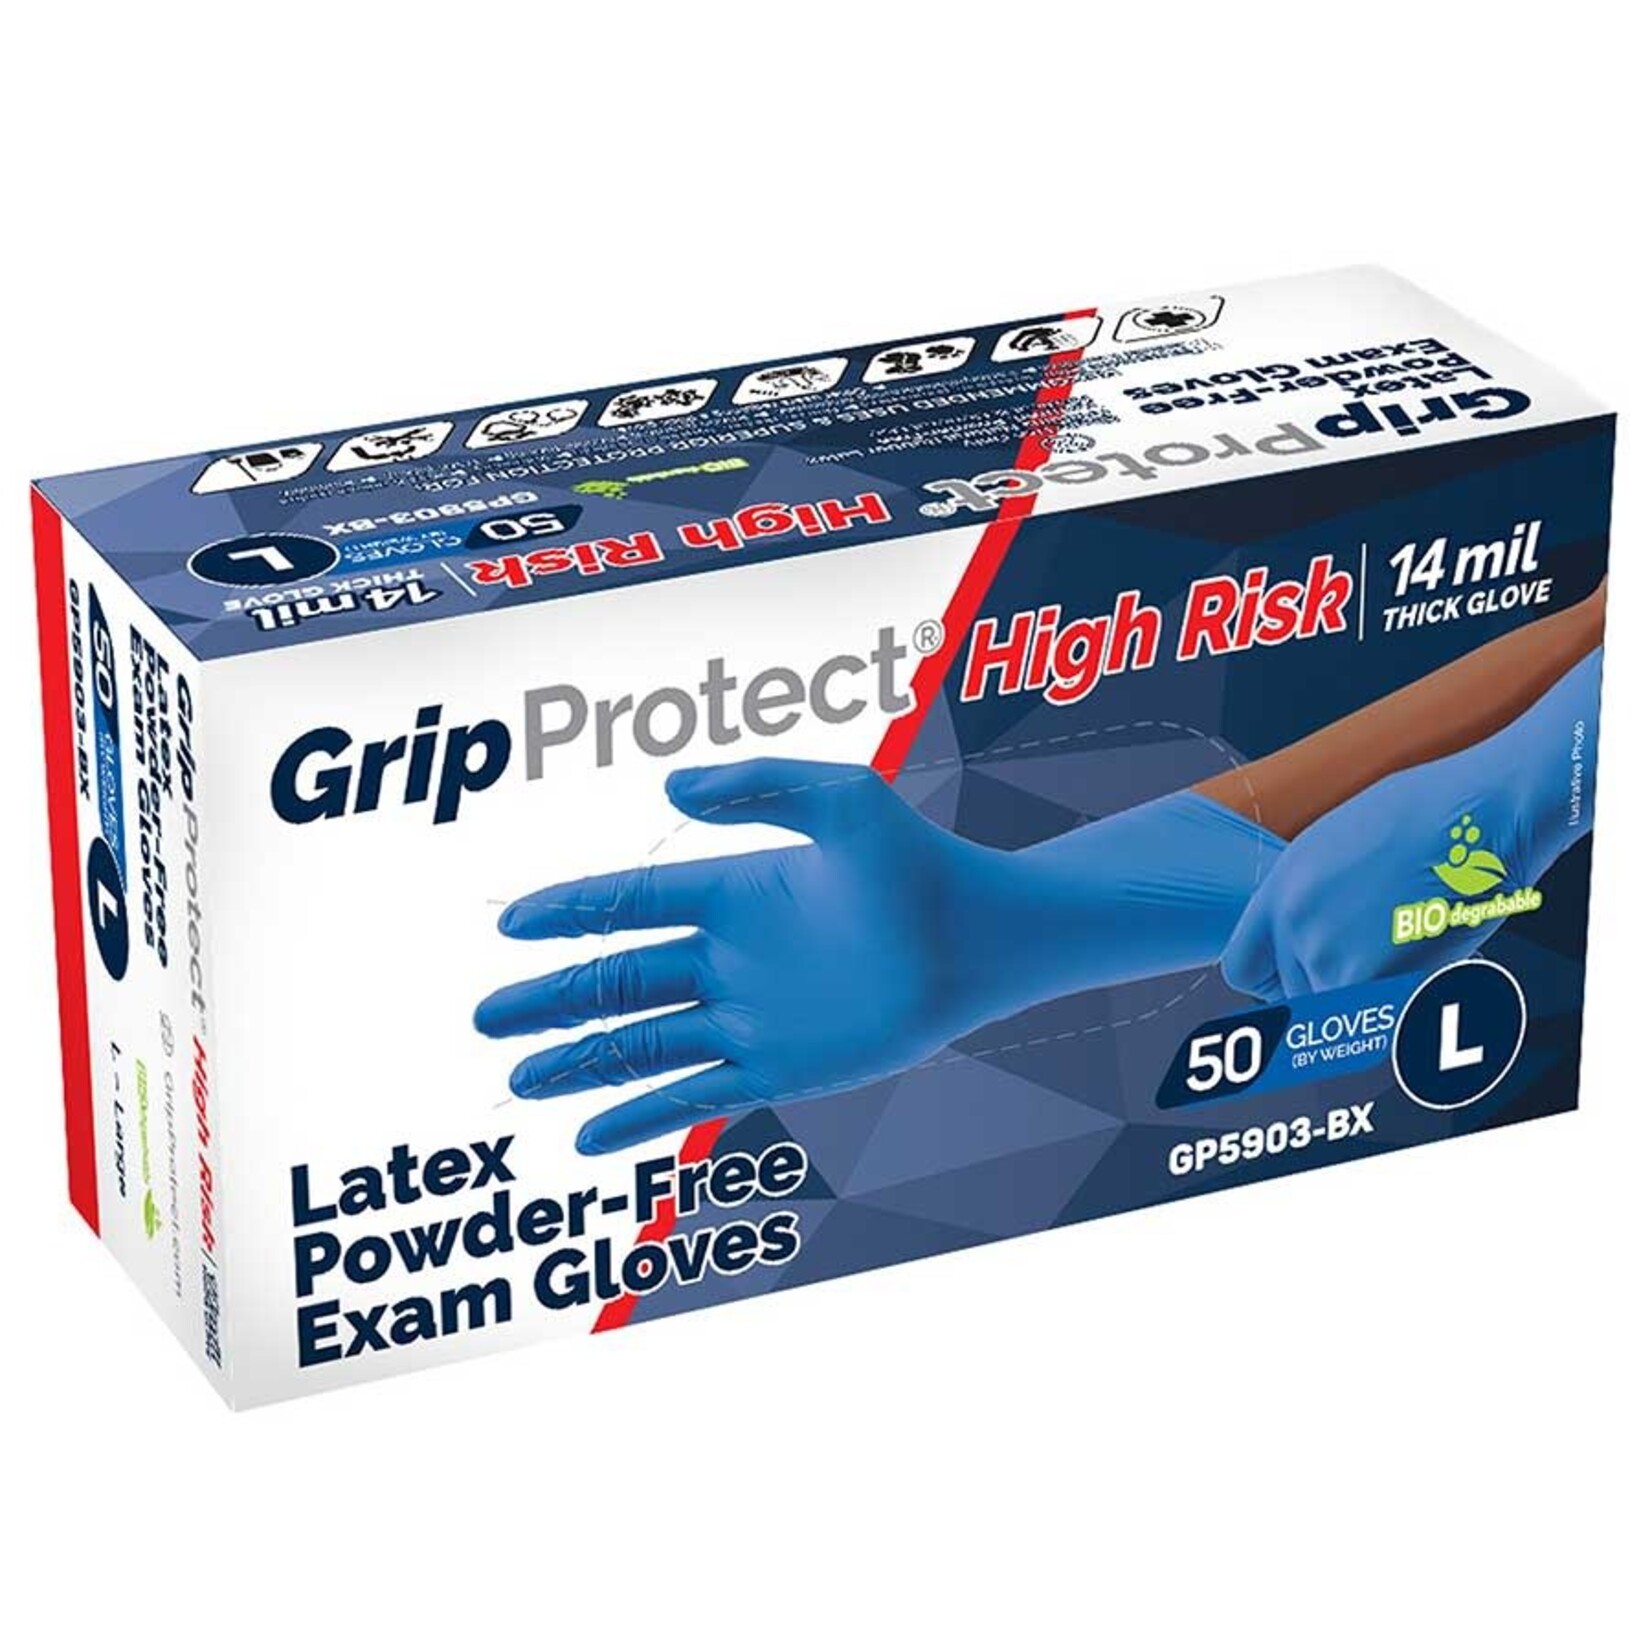 BMC Protect GripProtect High Risk 14 Mil Latex Powder-Free Exam Gloves, Blue, S (Case of 10 Boxes)